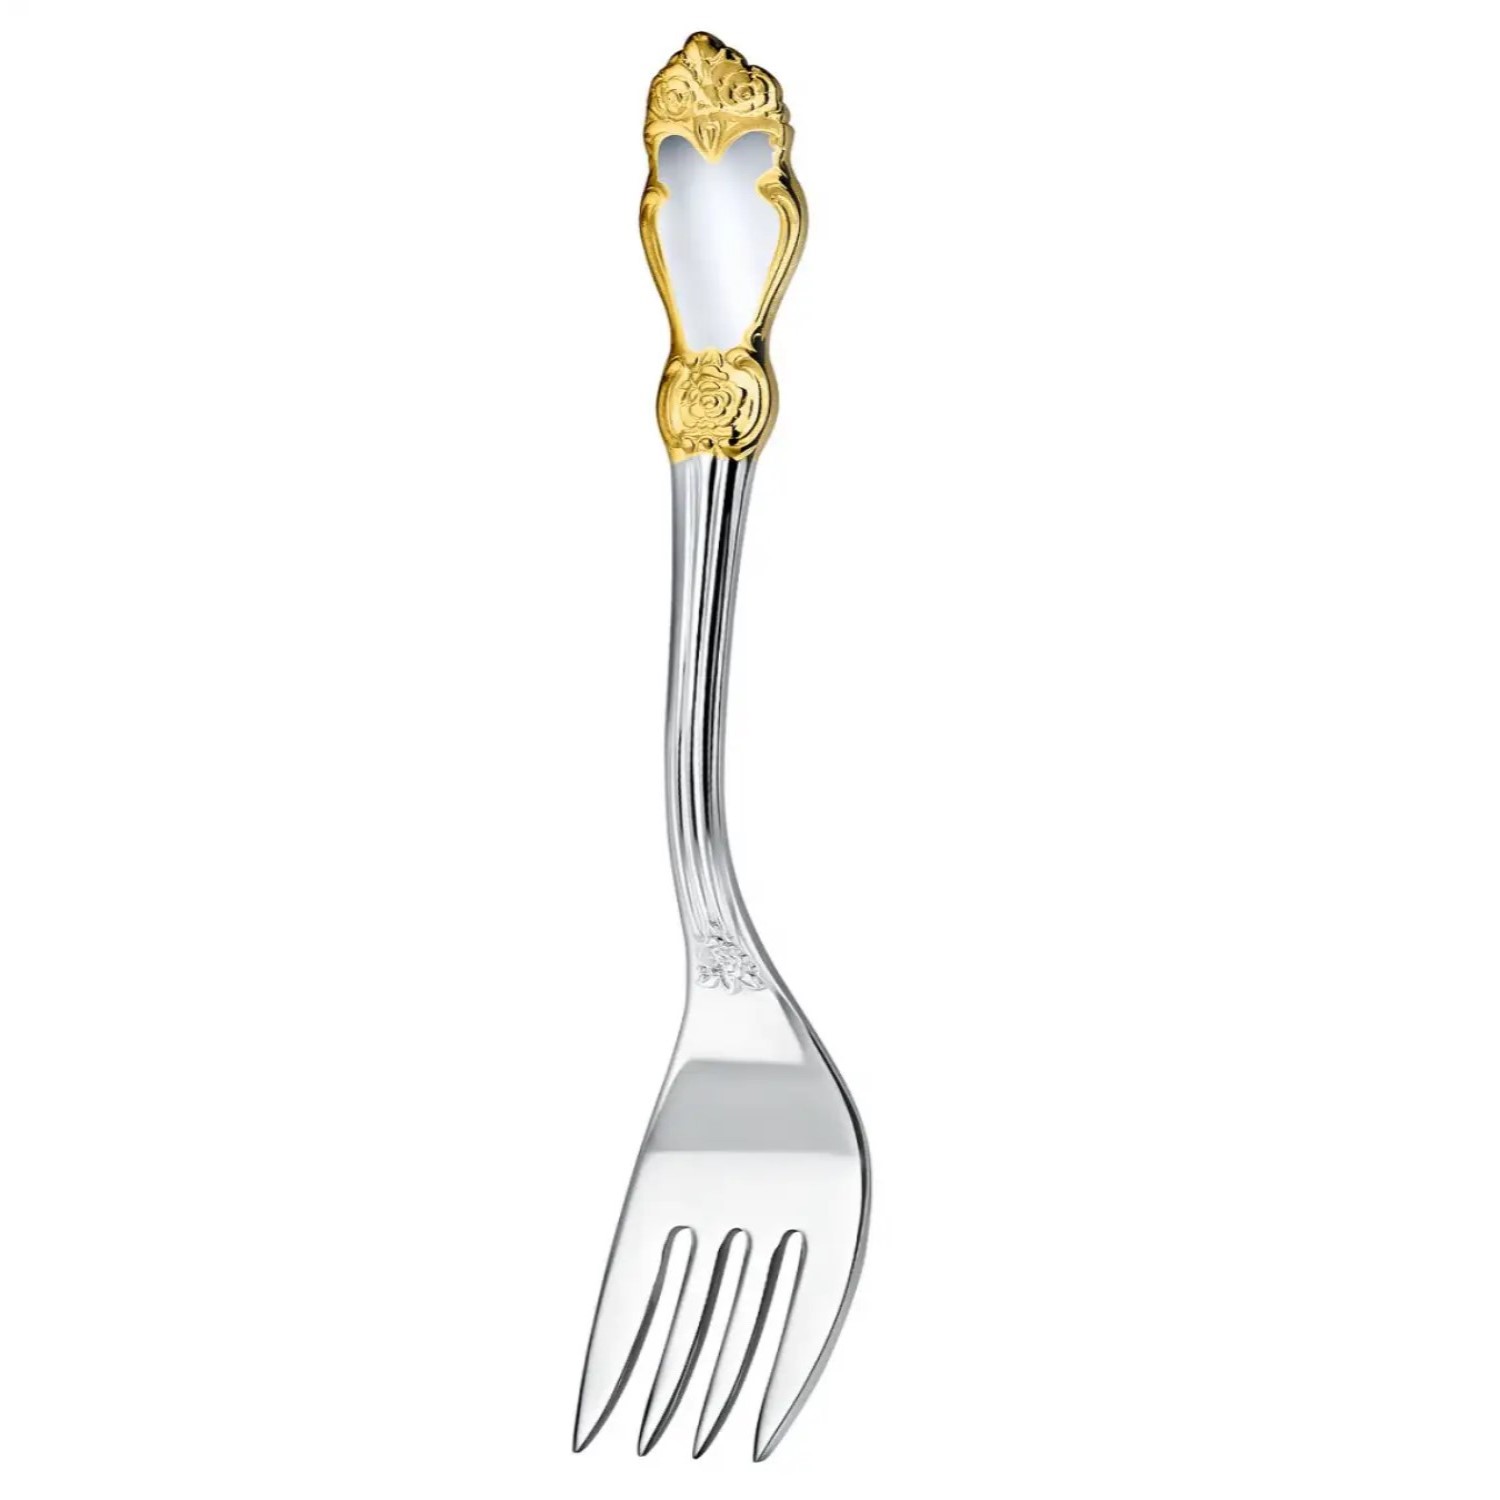 Nickel silver forks for fish